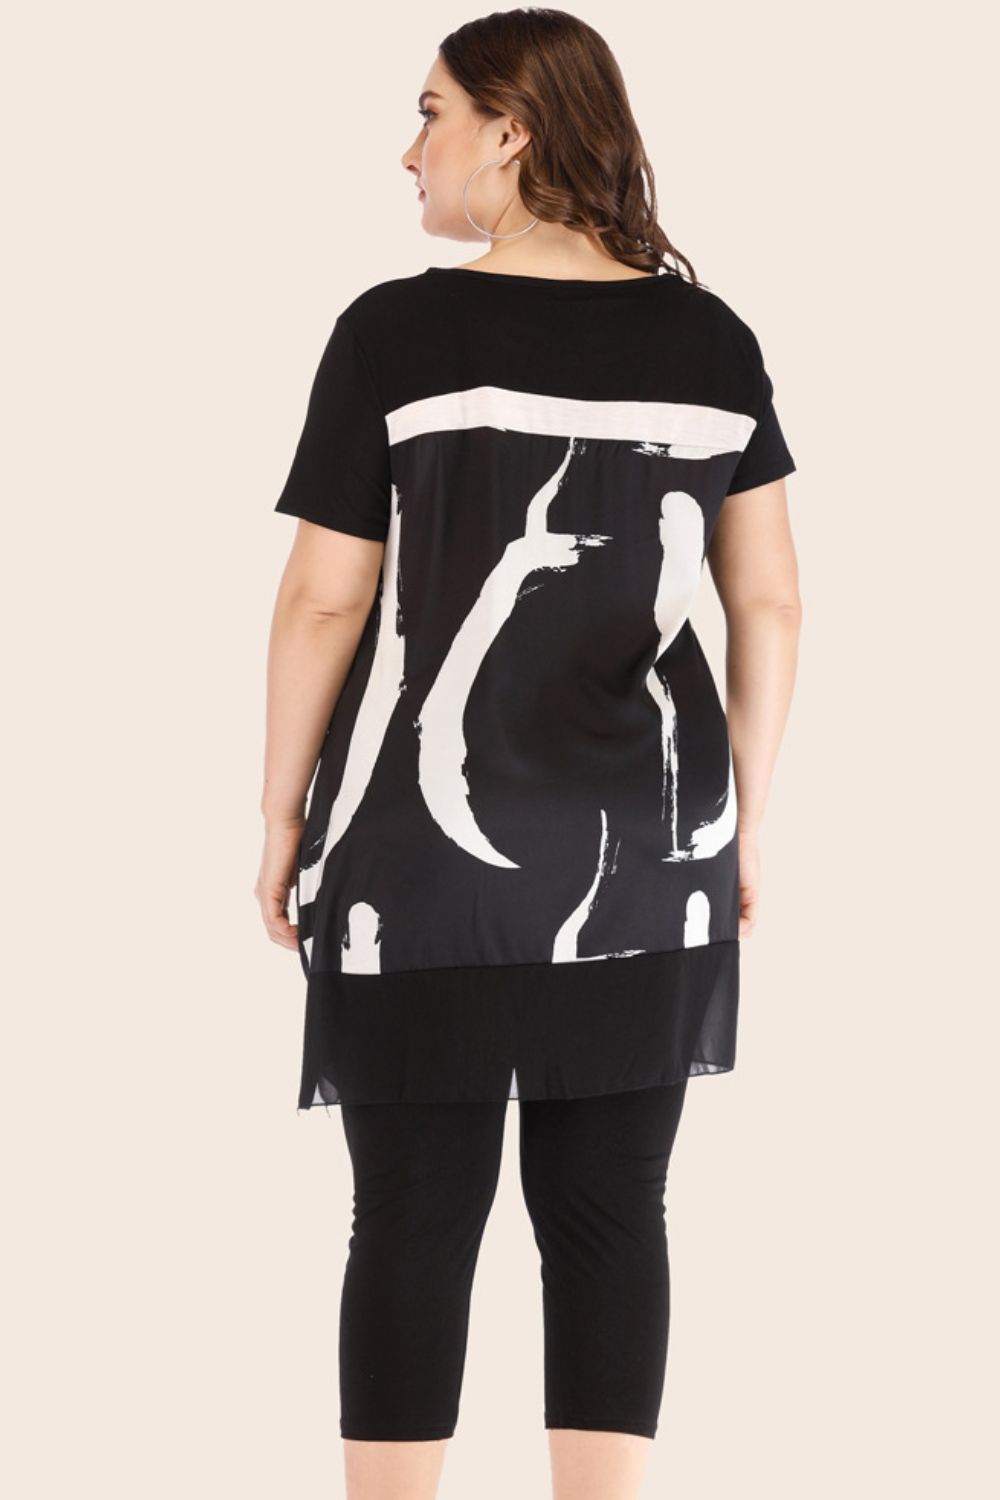 Plus Size Contrast Spliced Mesh T-Shirt and Cropped Leggings Set - Ryzela